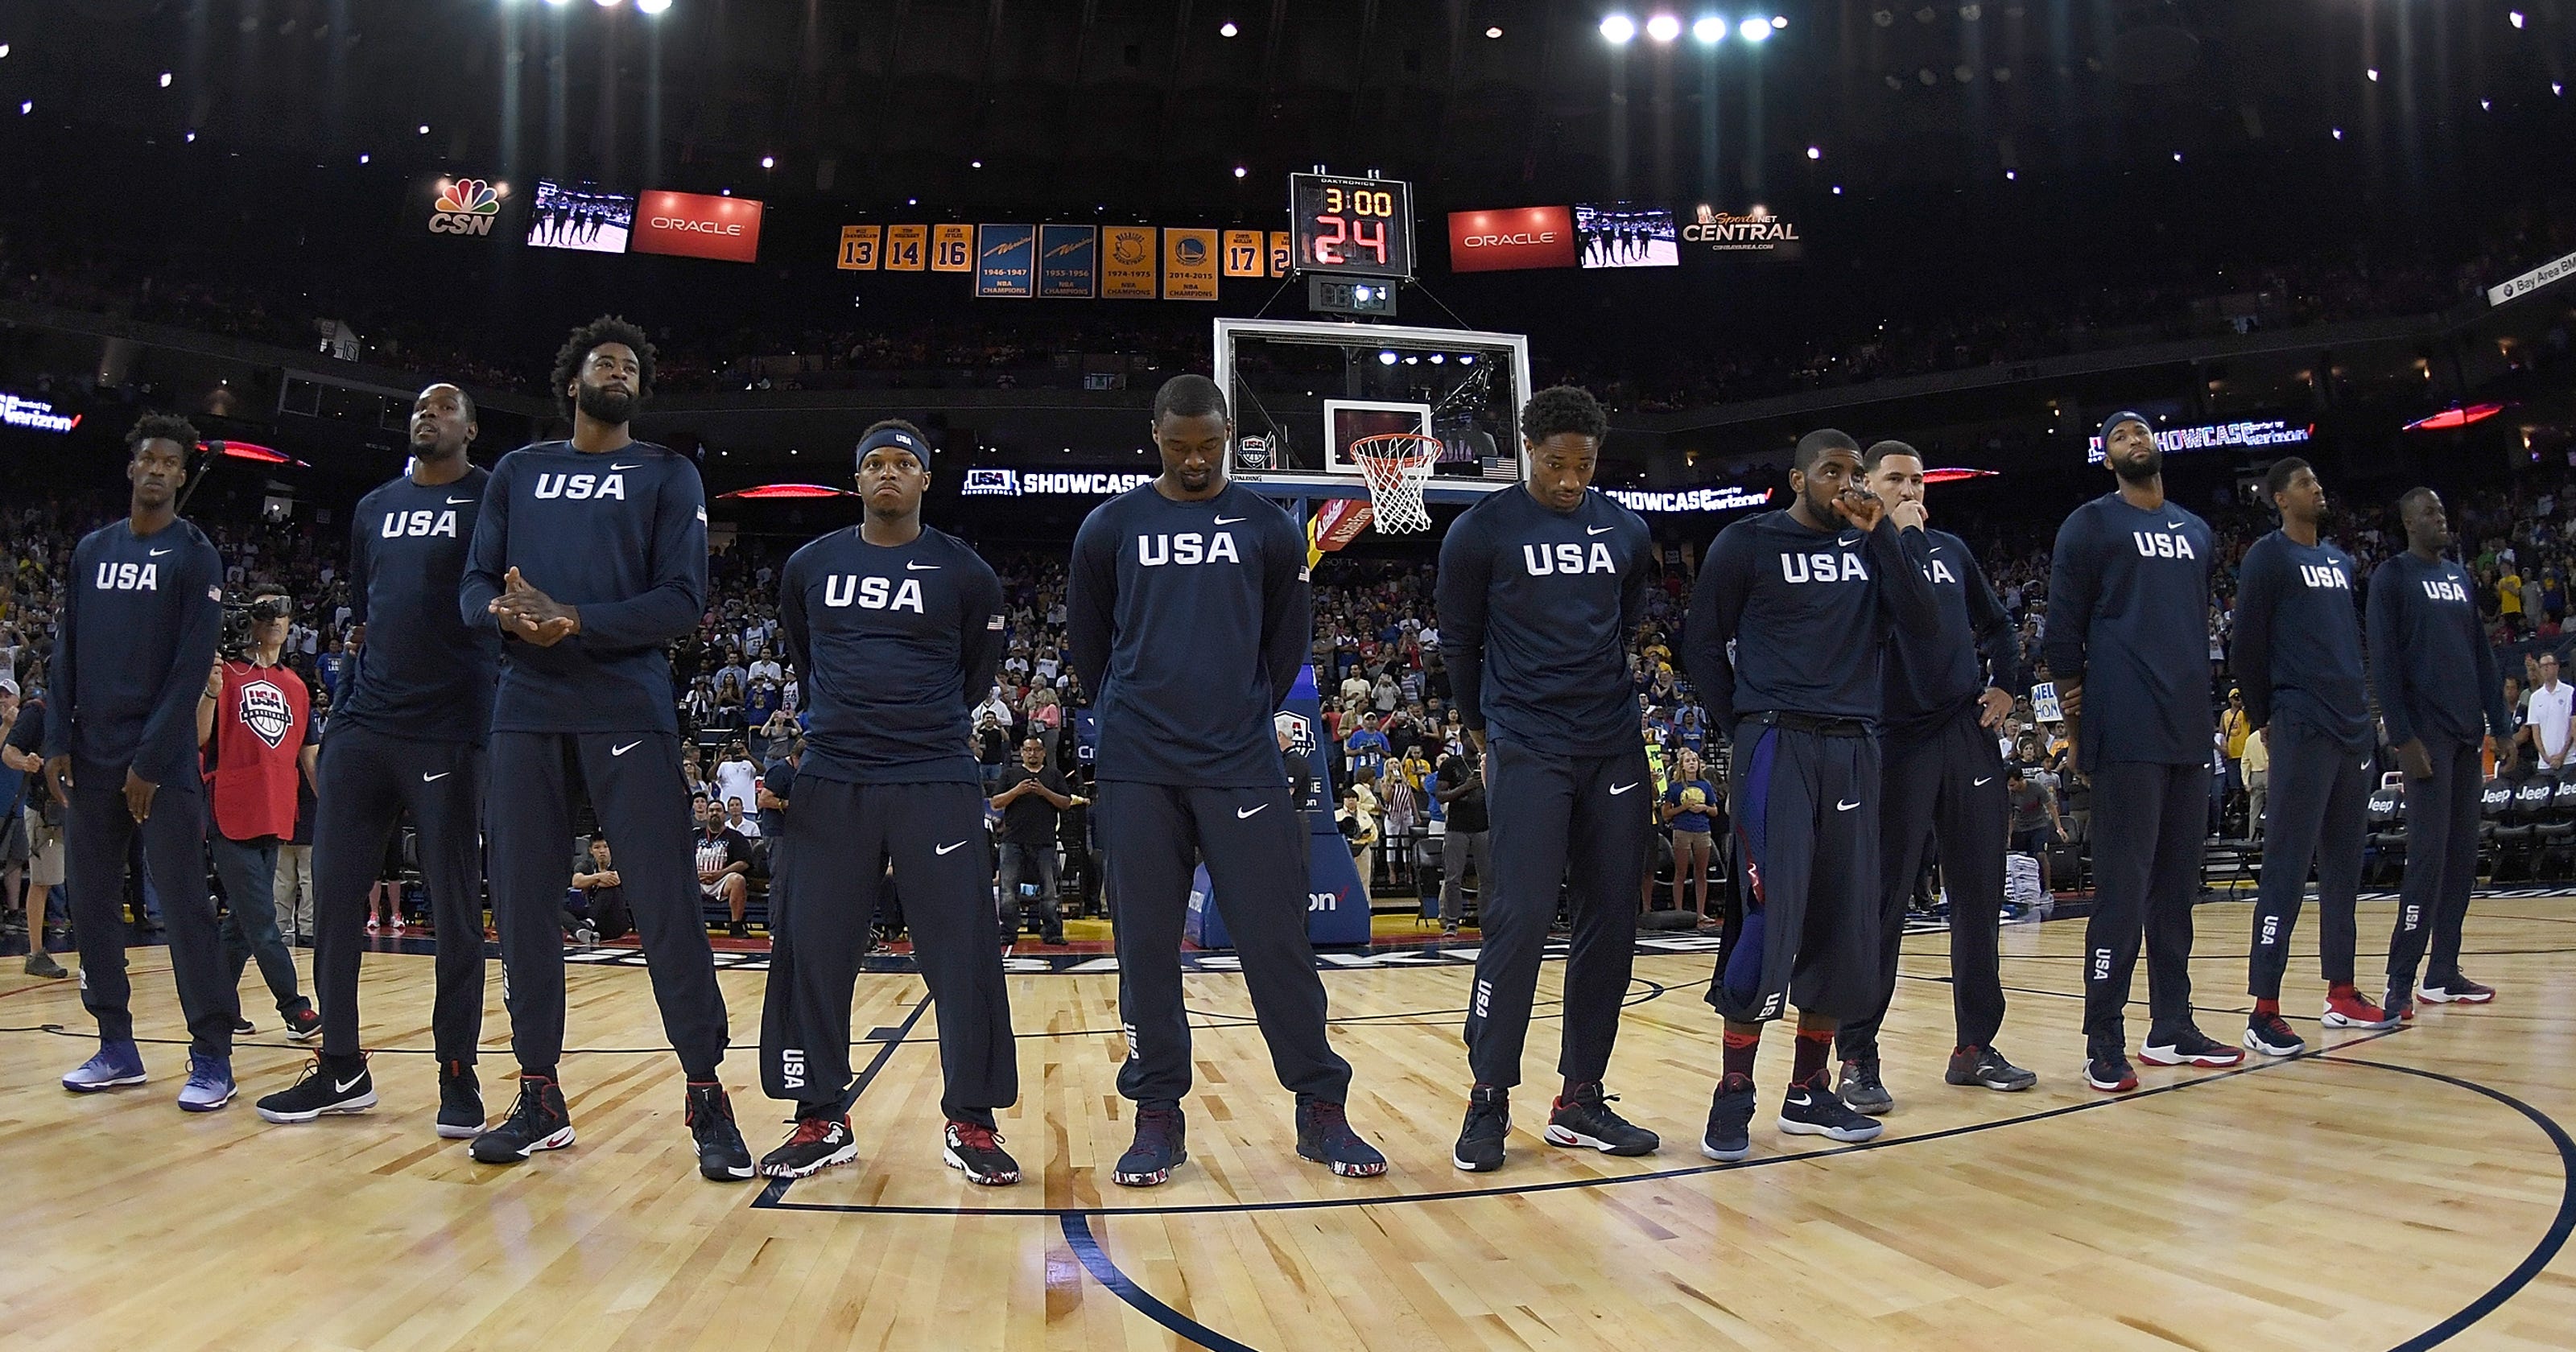 Record 46 NBA players competing in Rio Olympics